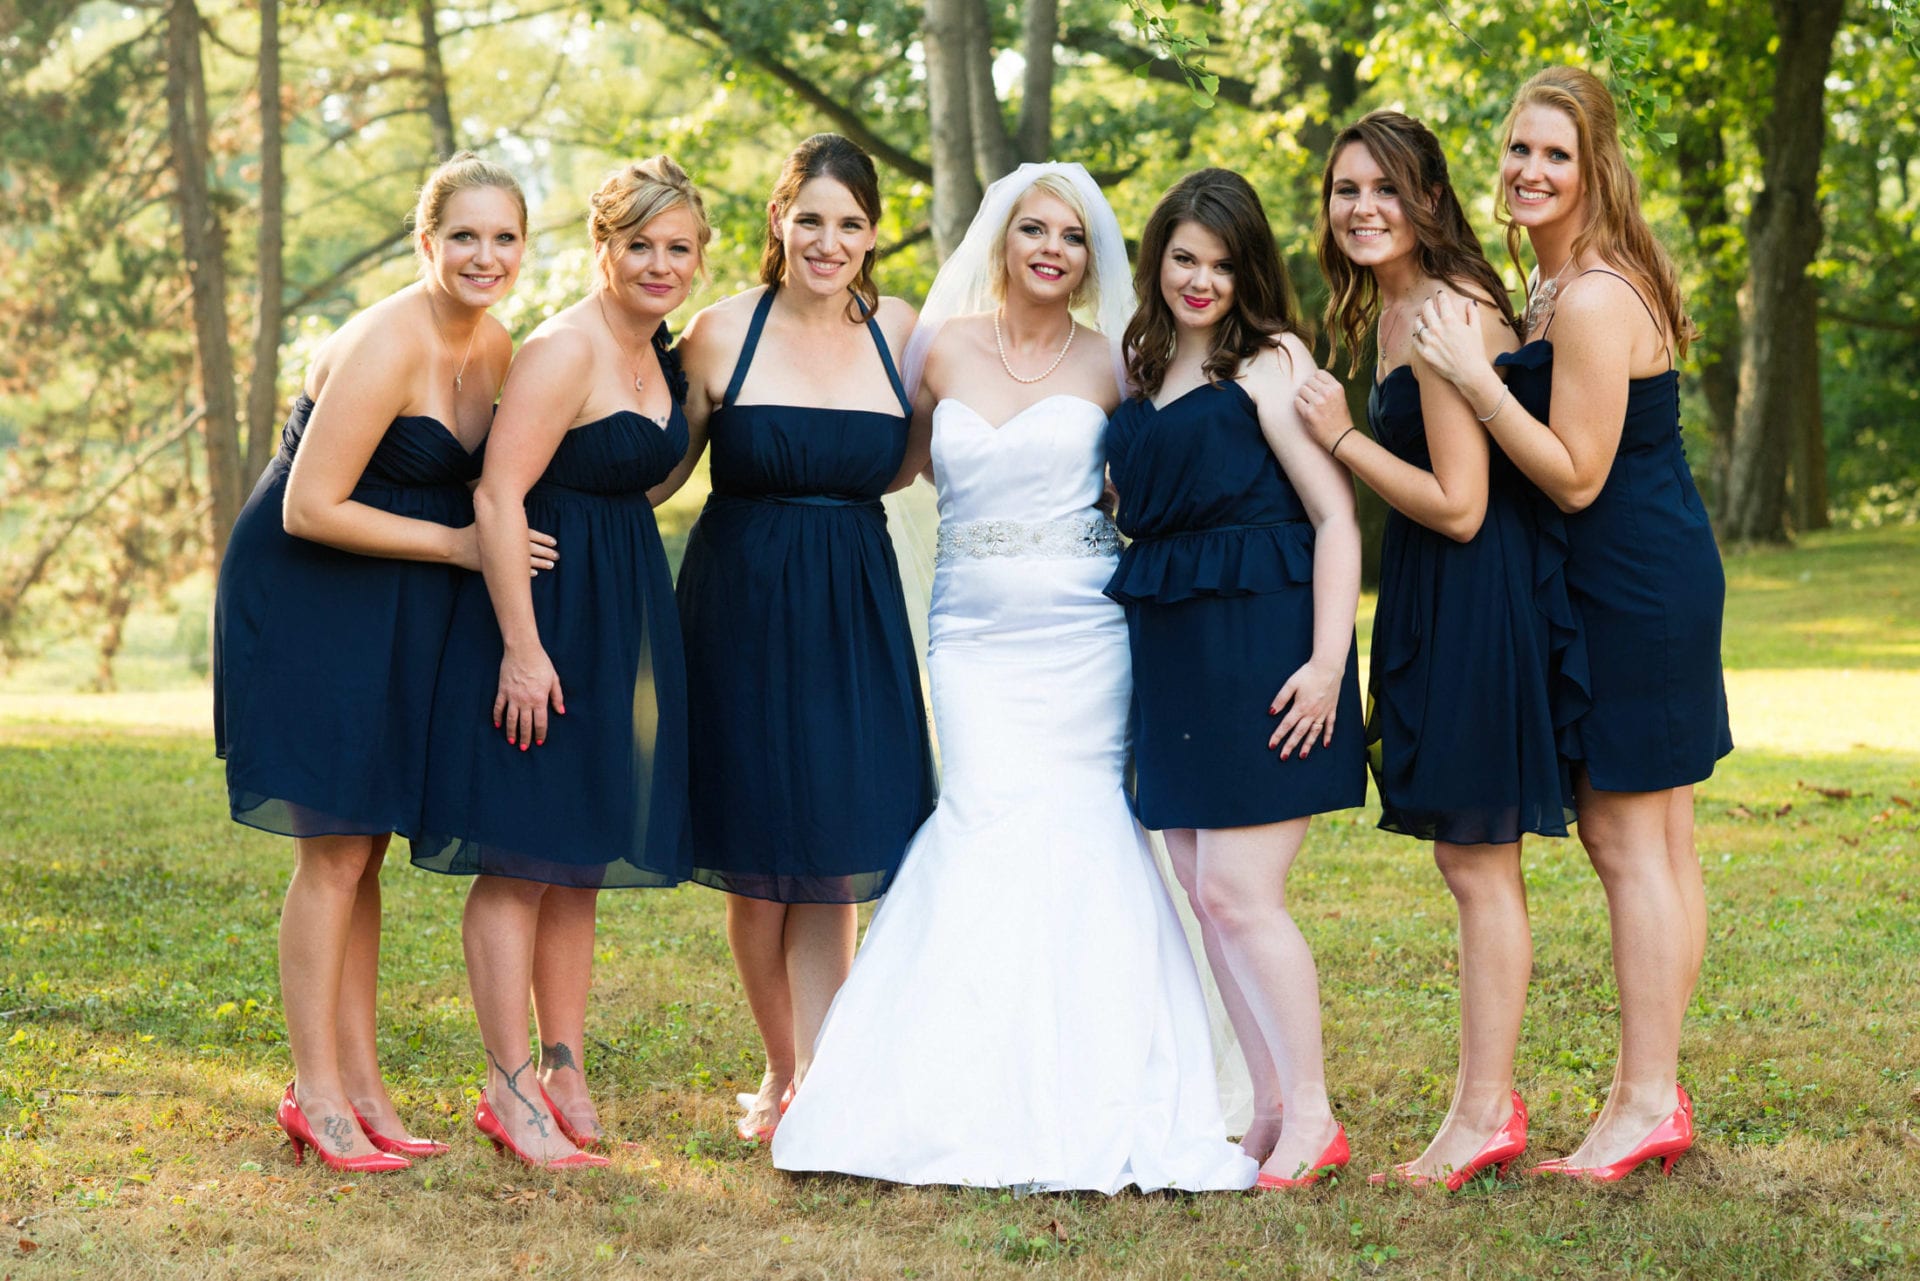 A bride stands with her bridesmaids in a wooded lot as they smile at the camera. The bridesmaids wear navy blue dresses and red shoes.